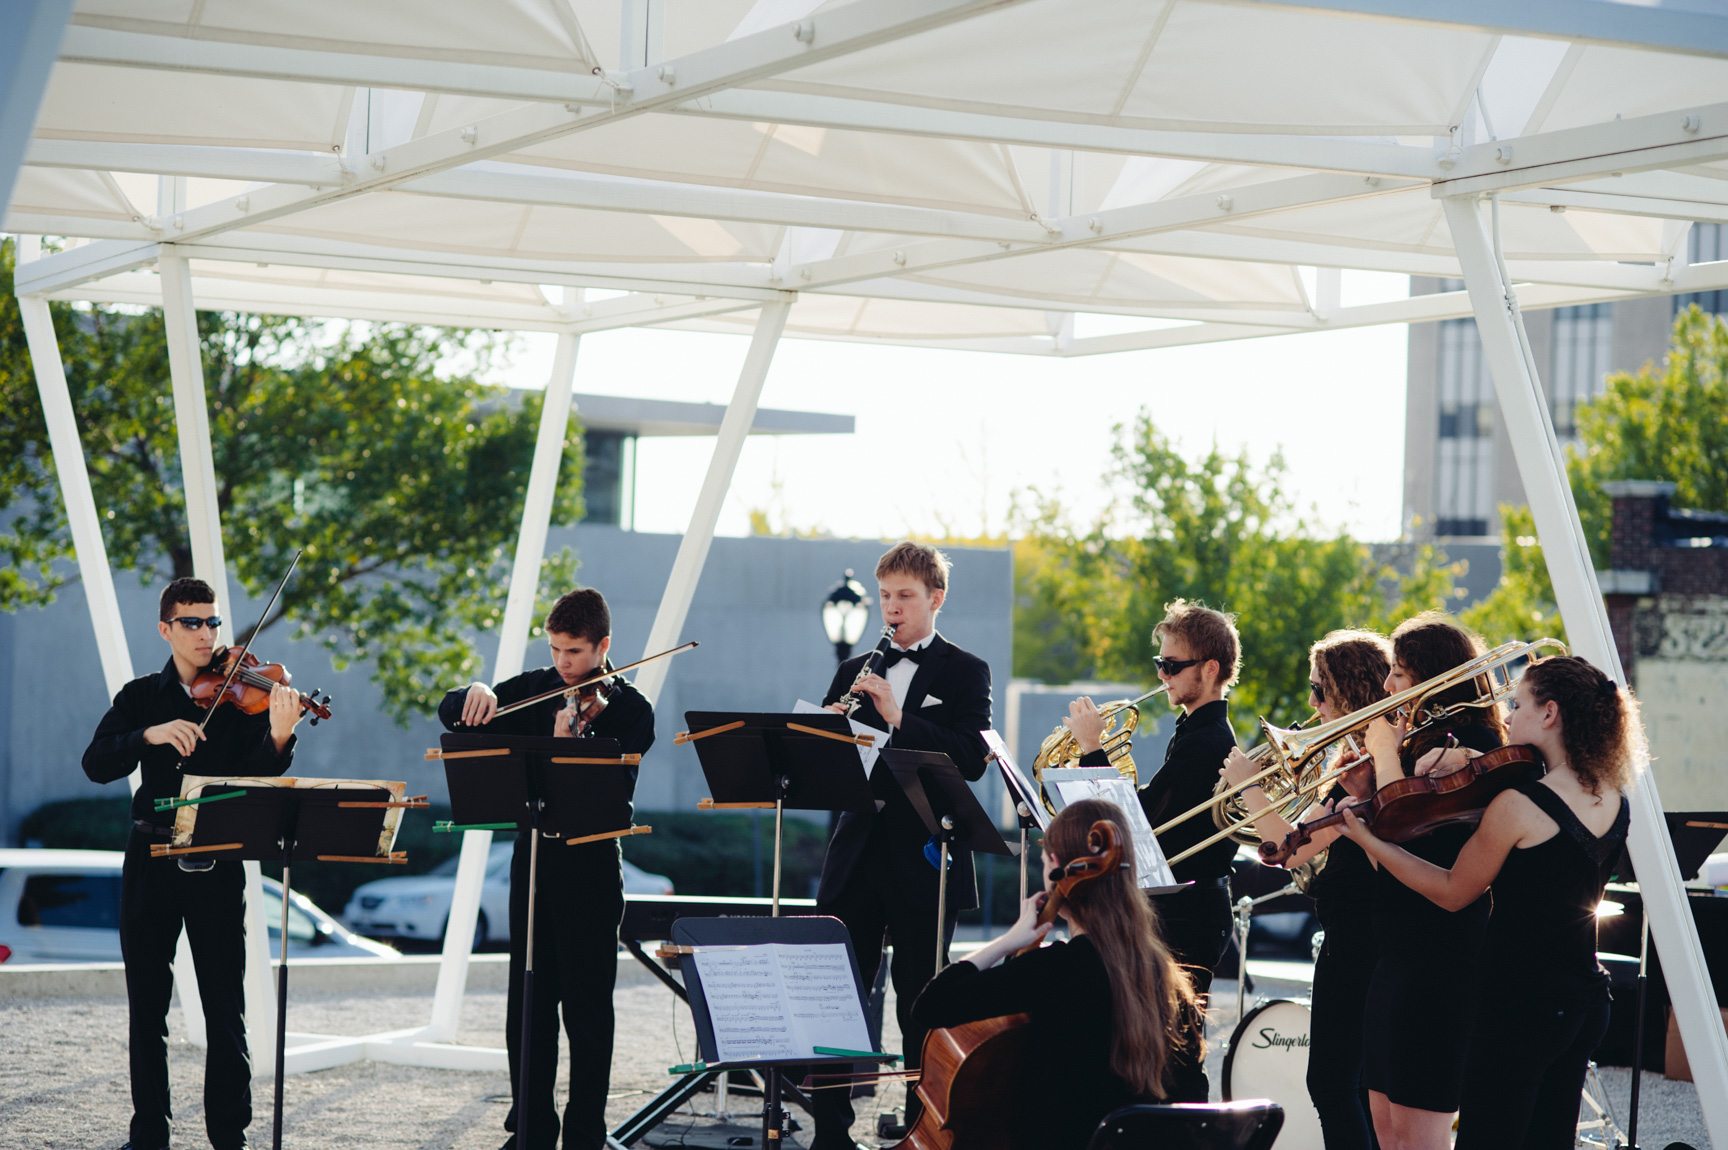 A group of student musicians in formal wear perform outdoors beneath a white geometric installation with a canopy.